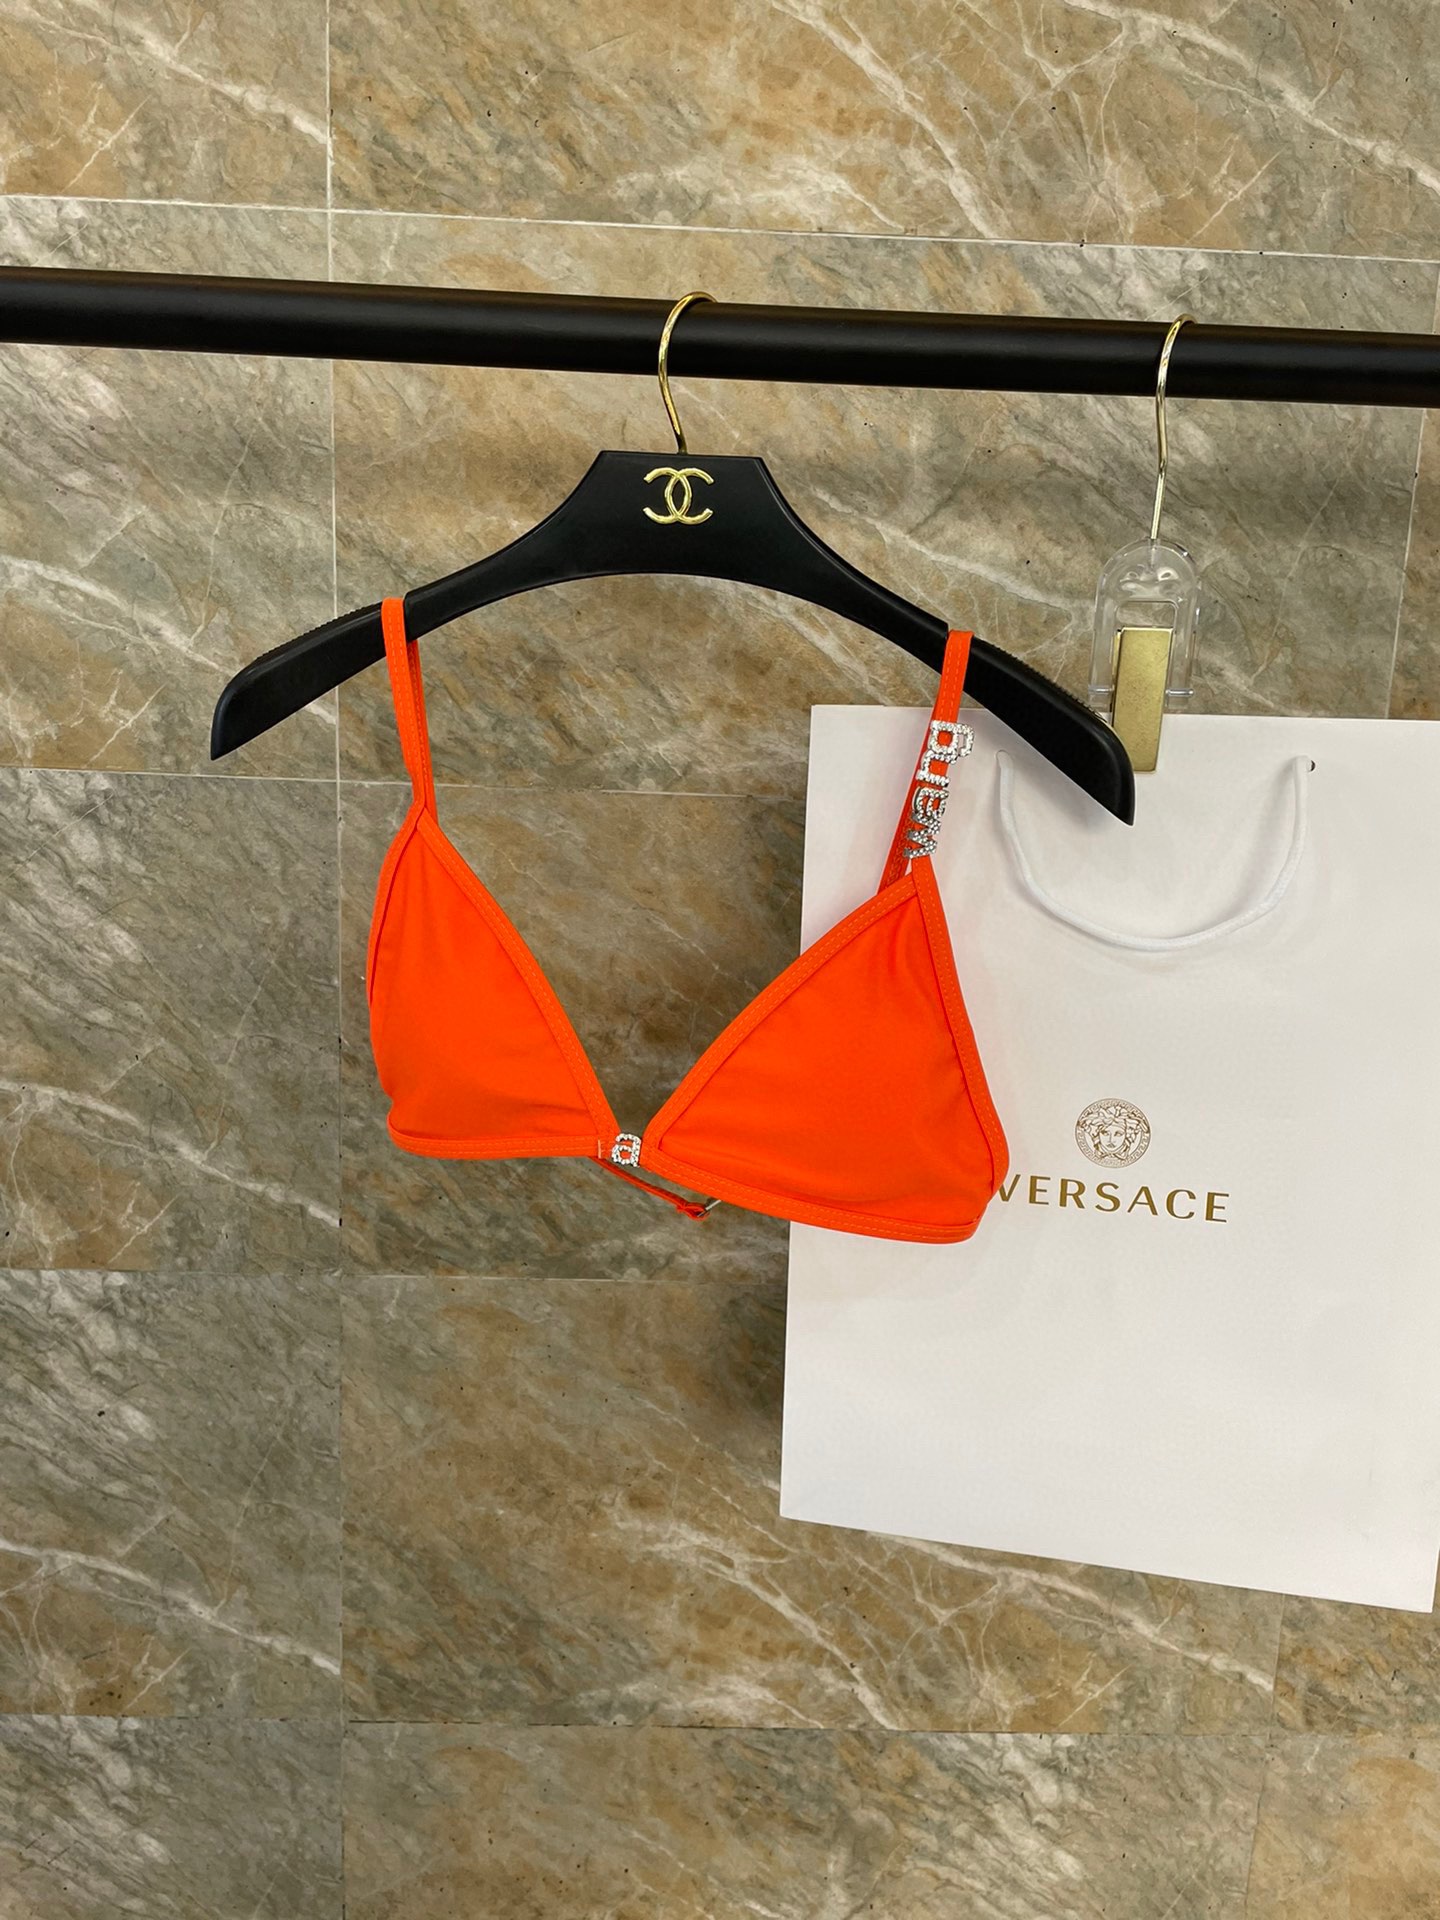 Shop Now
 Alexander Wang Clothing Swimwear & Beachwear Tank Tops&Camis Two Piece Outfits & Matching Sets